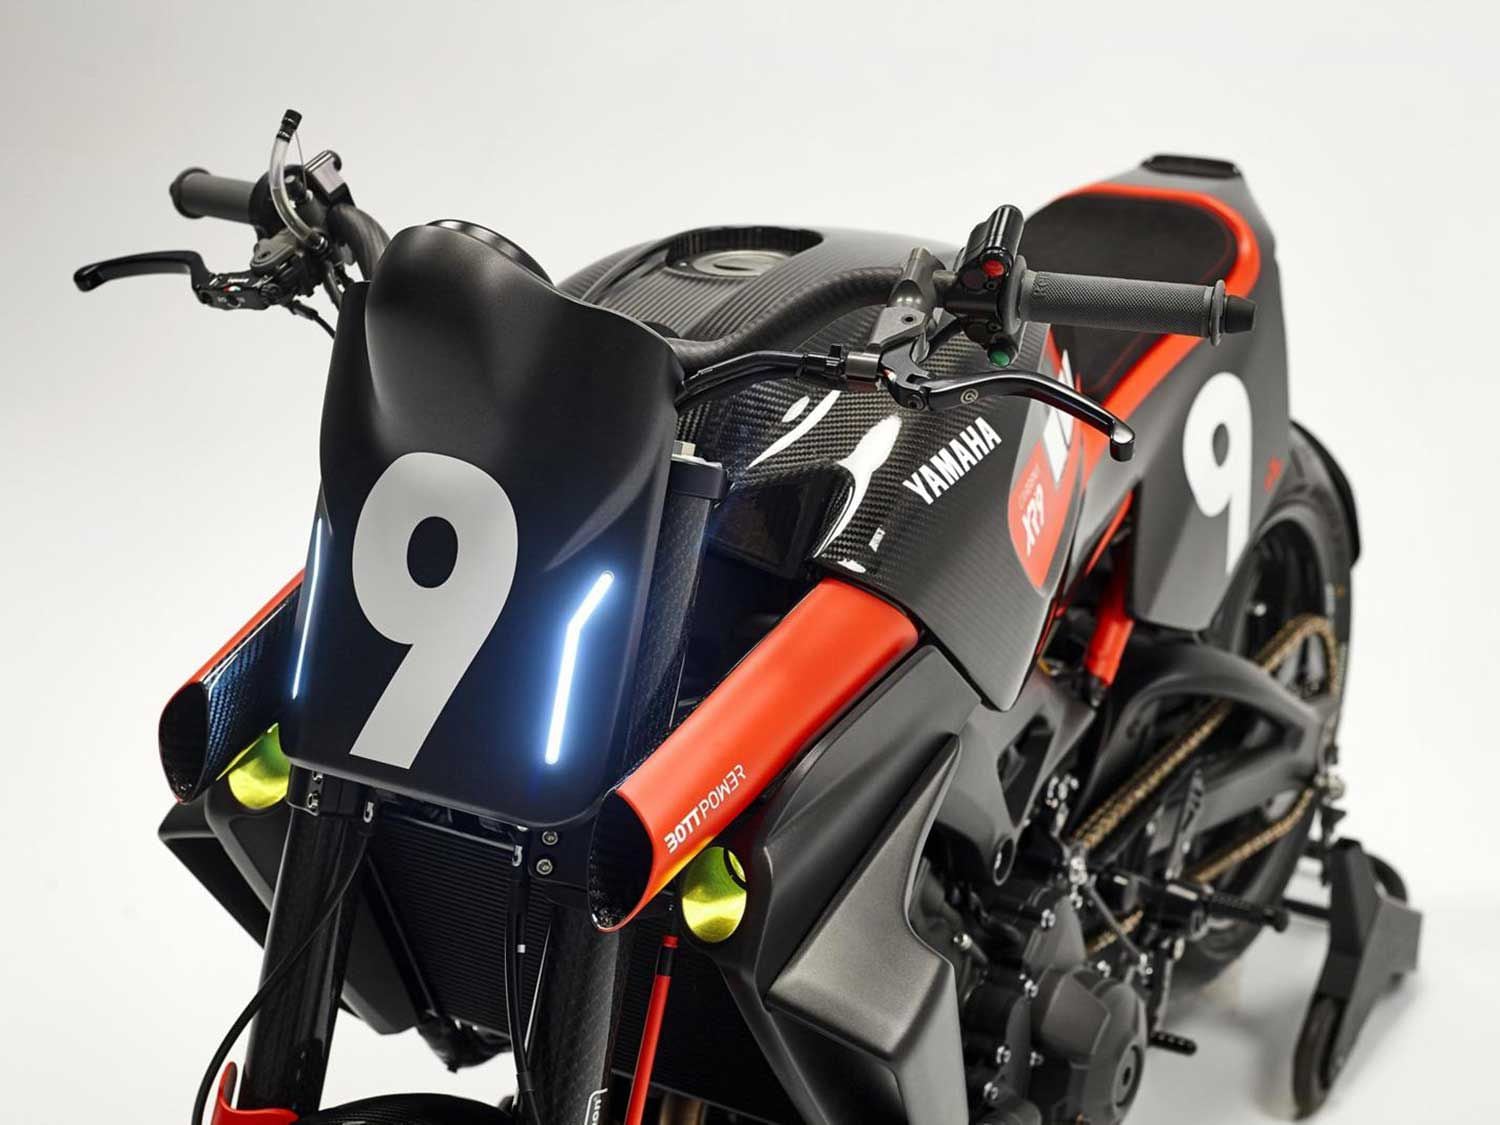 The XR9 Carbona takes cues from the Yamaha R1 and R6, working in the sportbikes’ round LED marker lights and a number plate in a nod to Yamaha’s racing heritage.